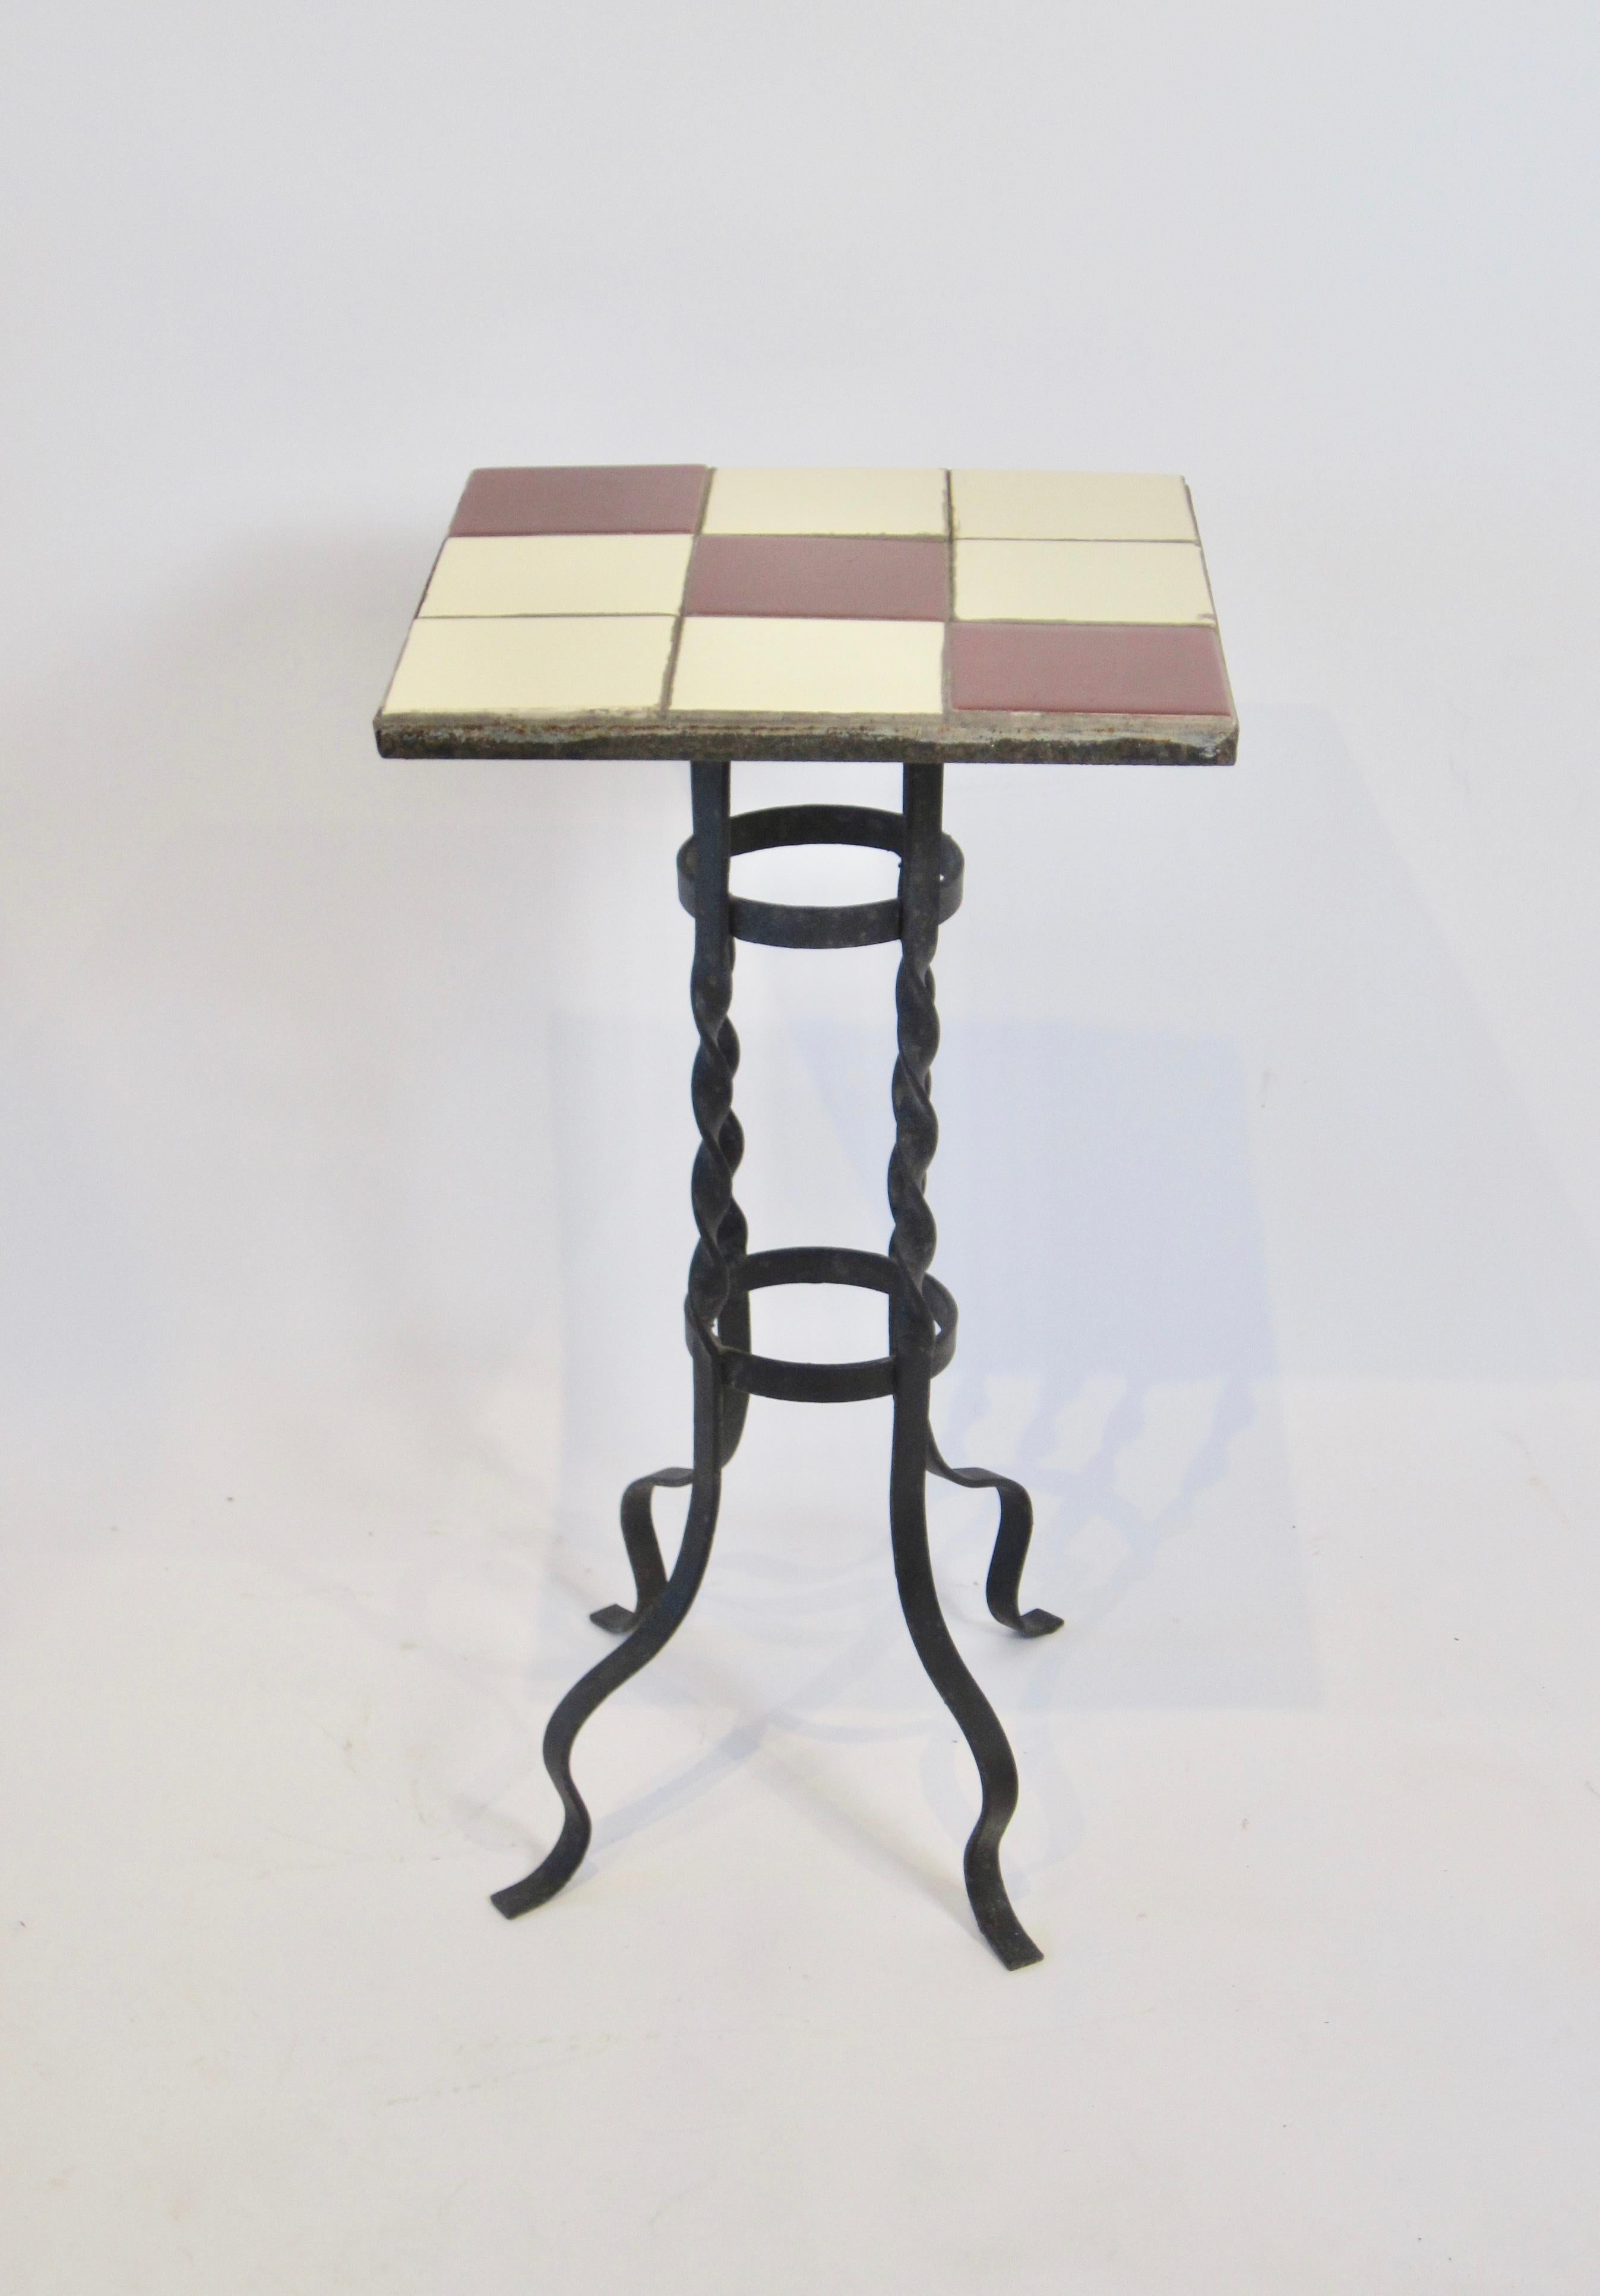 American Tile-Top Plant Stand Table with Twisted Wrought Iron Base